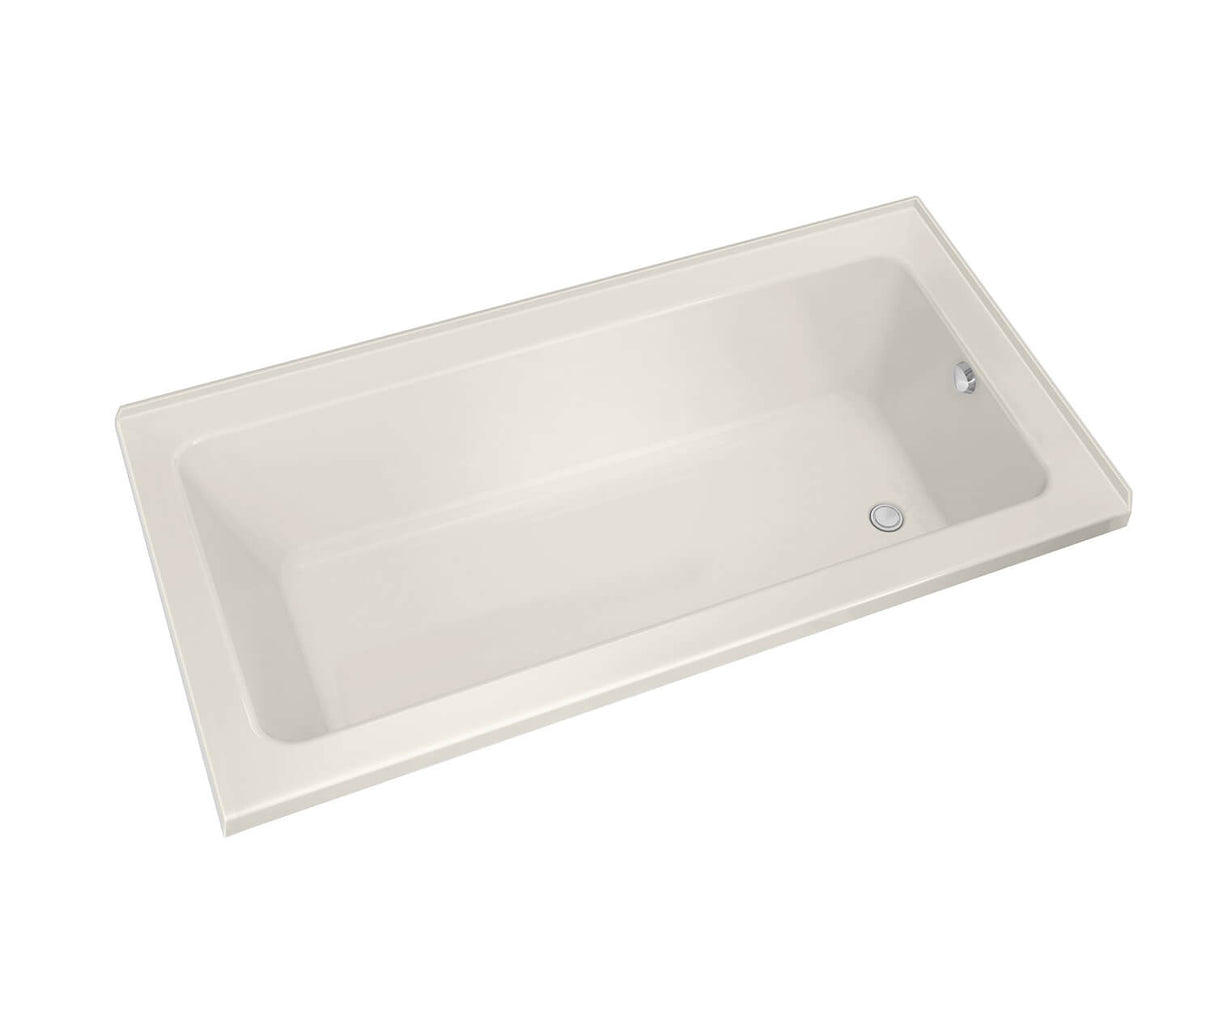 MAAX 106200-R-103-007 Pose 6030 IF Acrylic Corner Right Right-Hand Drain Aeroeffect Bathtub in Biscuit